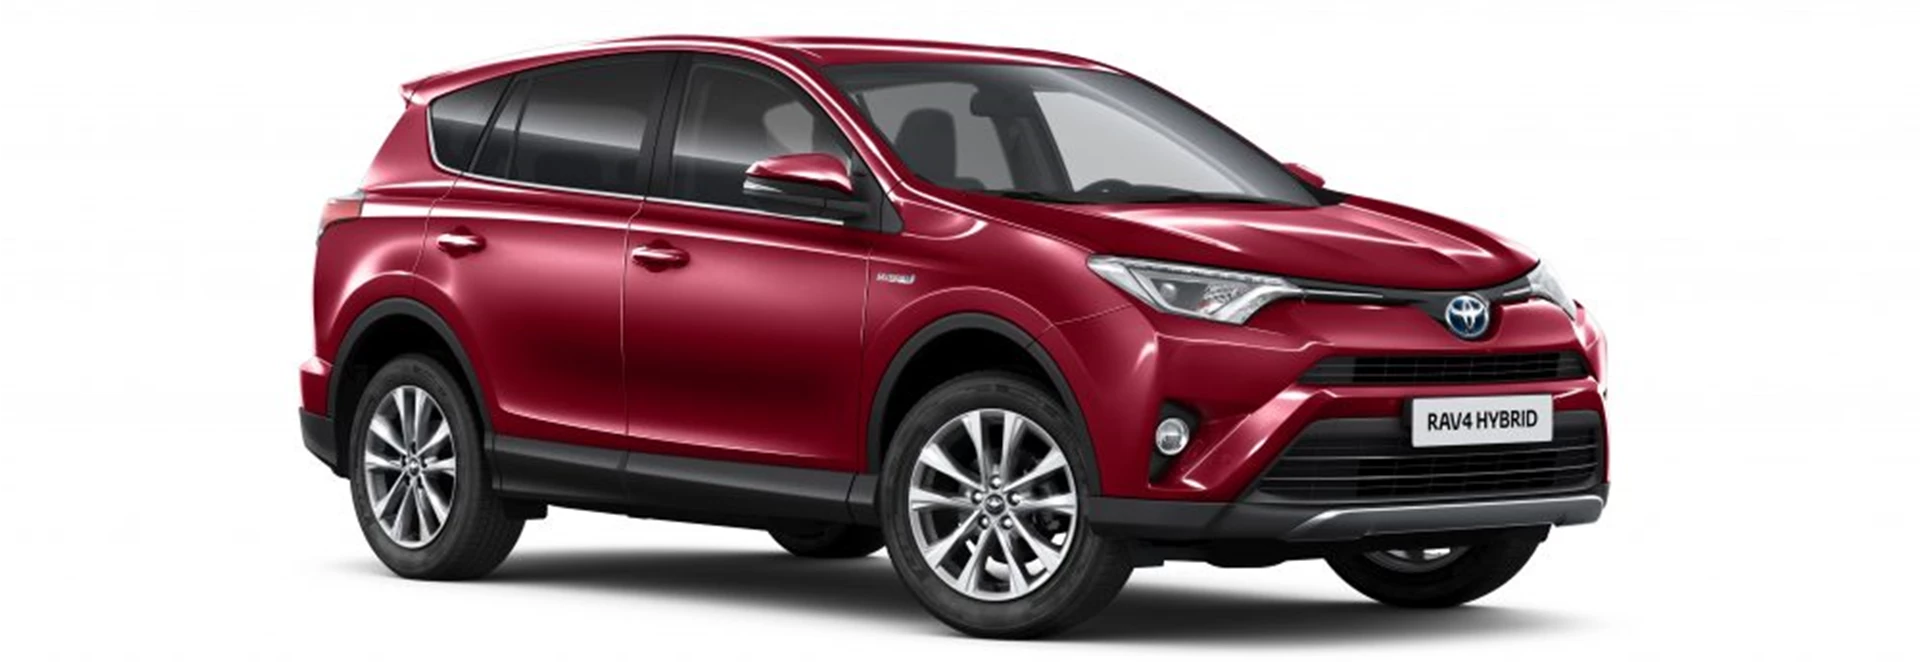 New hybrids lead the changes to the 2018 Toyota RAV4 